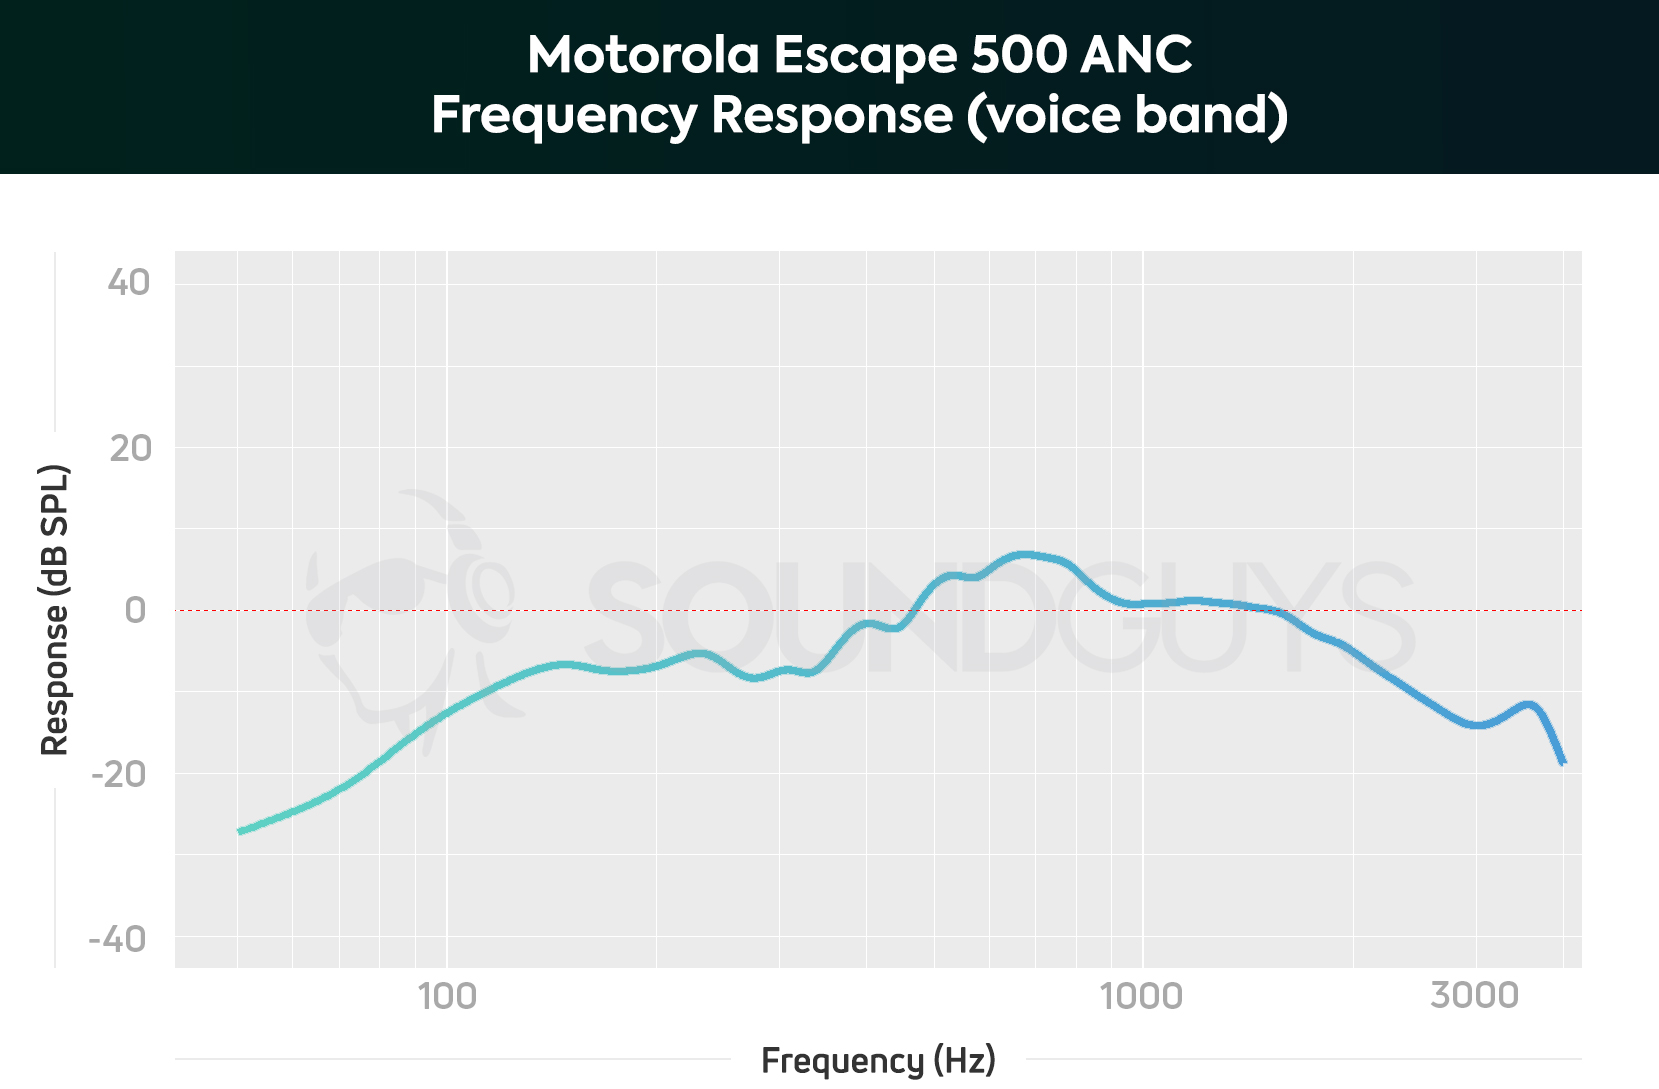 A chart depicting the Motorola Escape 500 ANC microphone frequency response limited to the human voice; it attenuates low-frequencies.